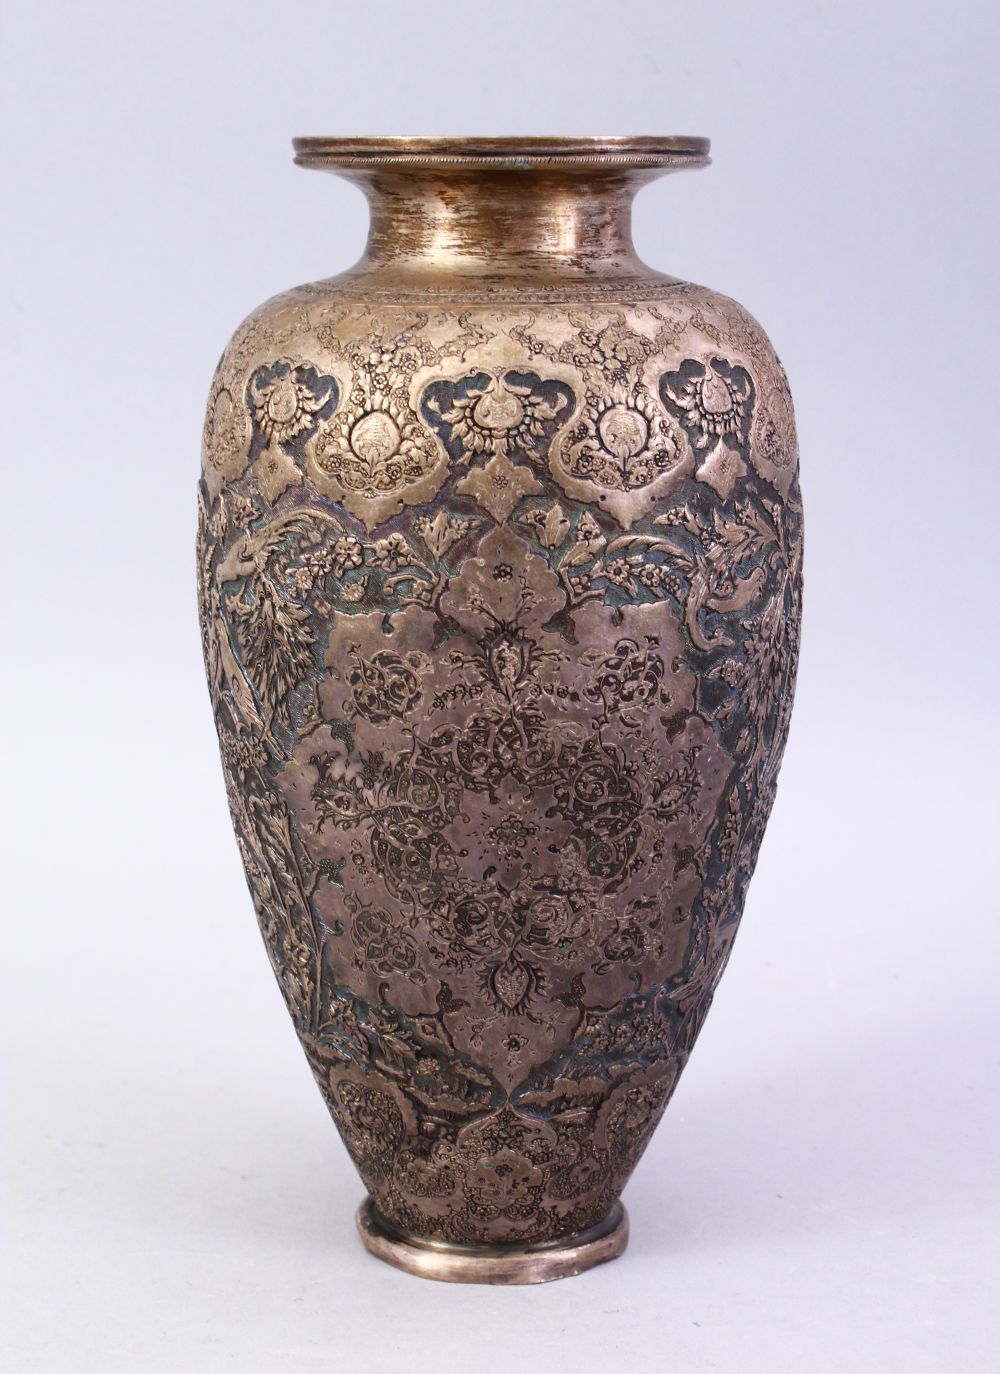 A 18TH / 19TH CENTURY IRANIAN CARVED SILVER VASE, with a multitude of decoration depicting flora and